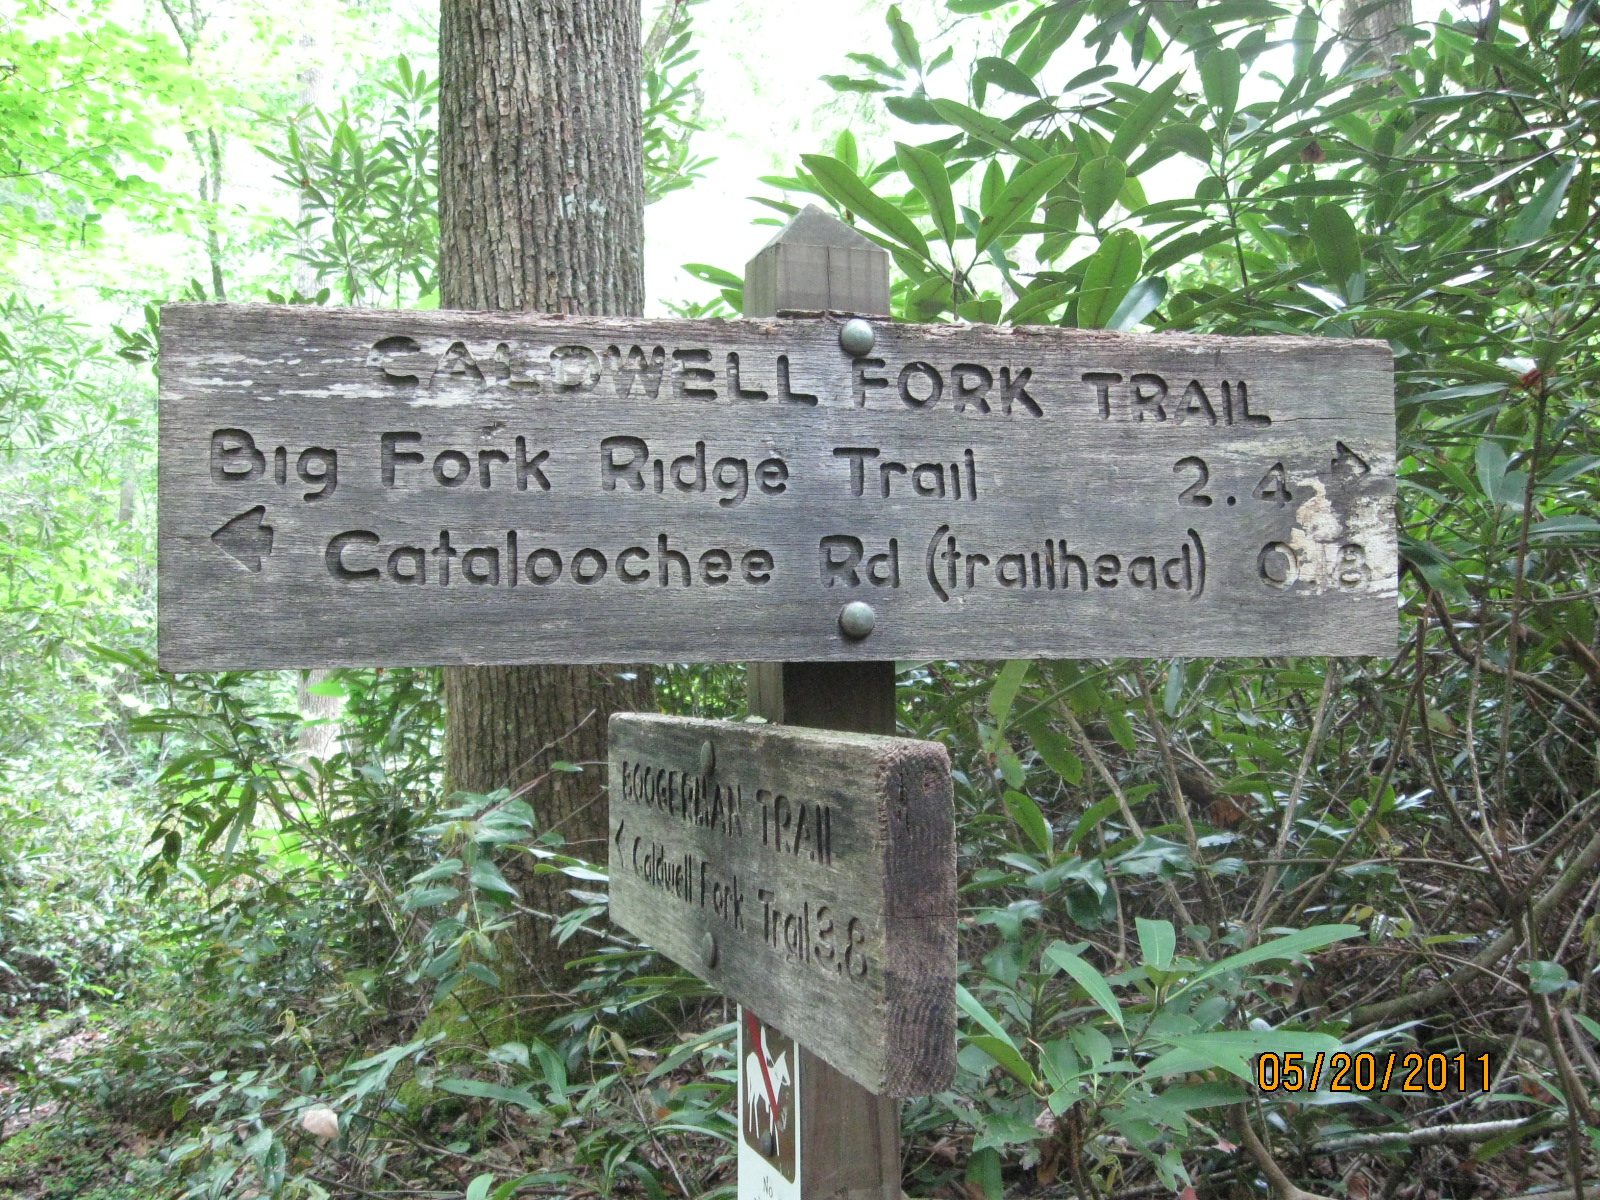 Caldwell Fork Trail, trail sign for junction with Boogerman trail